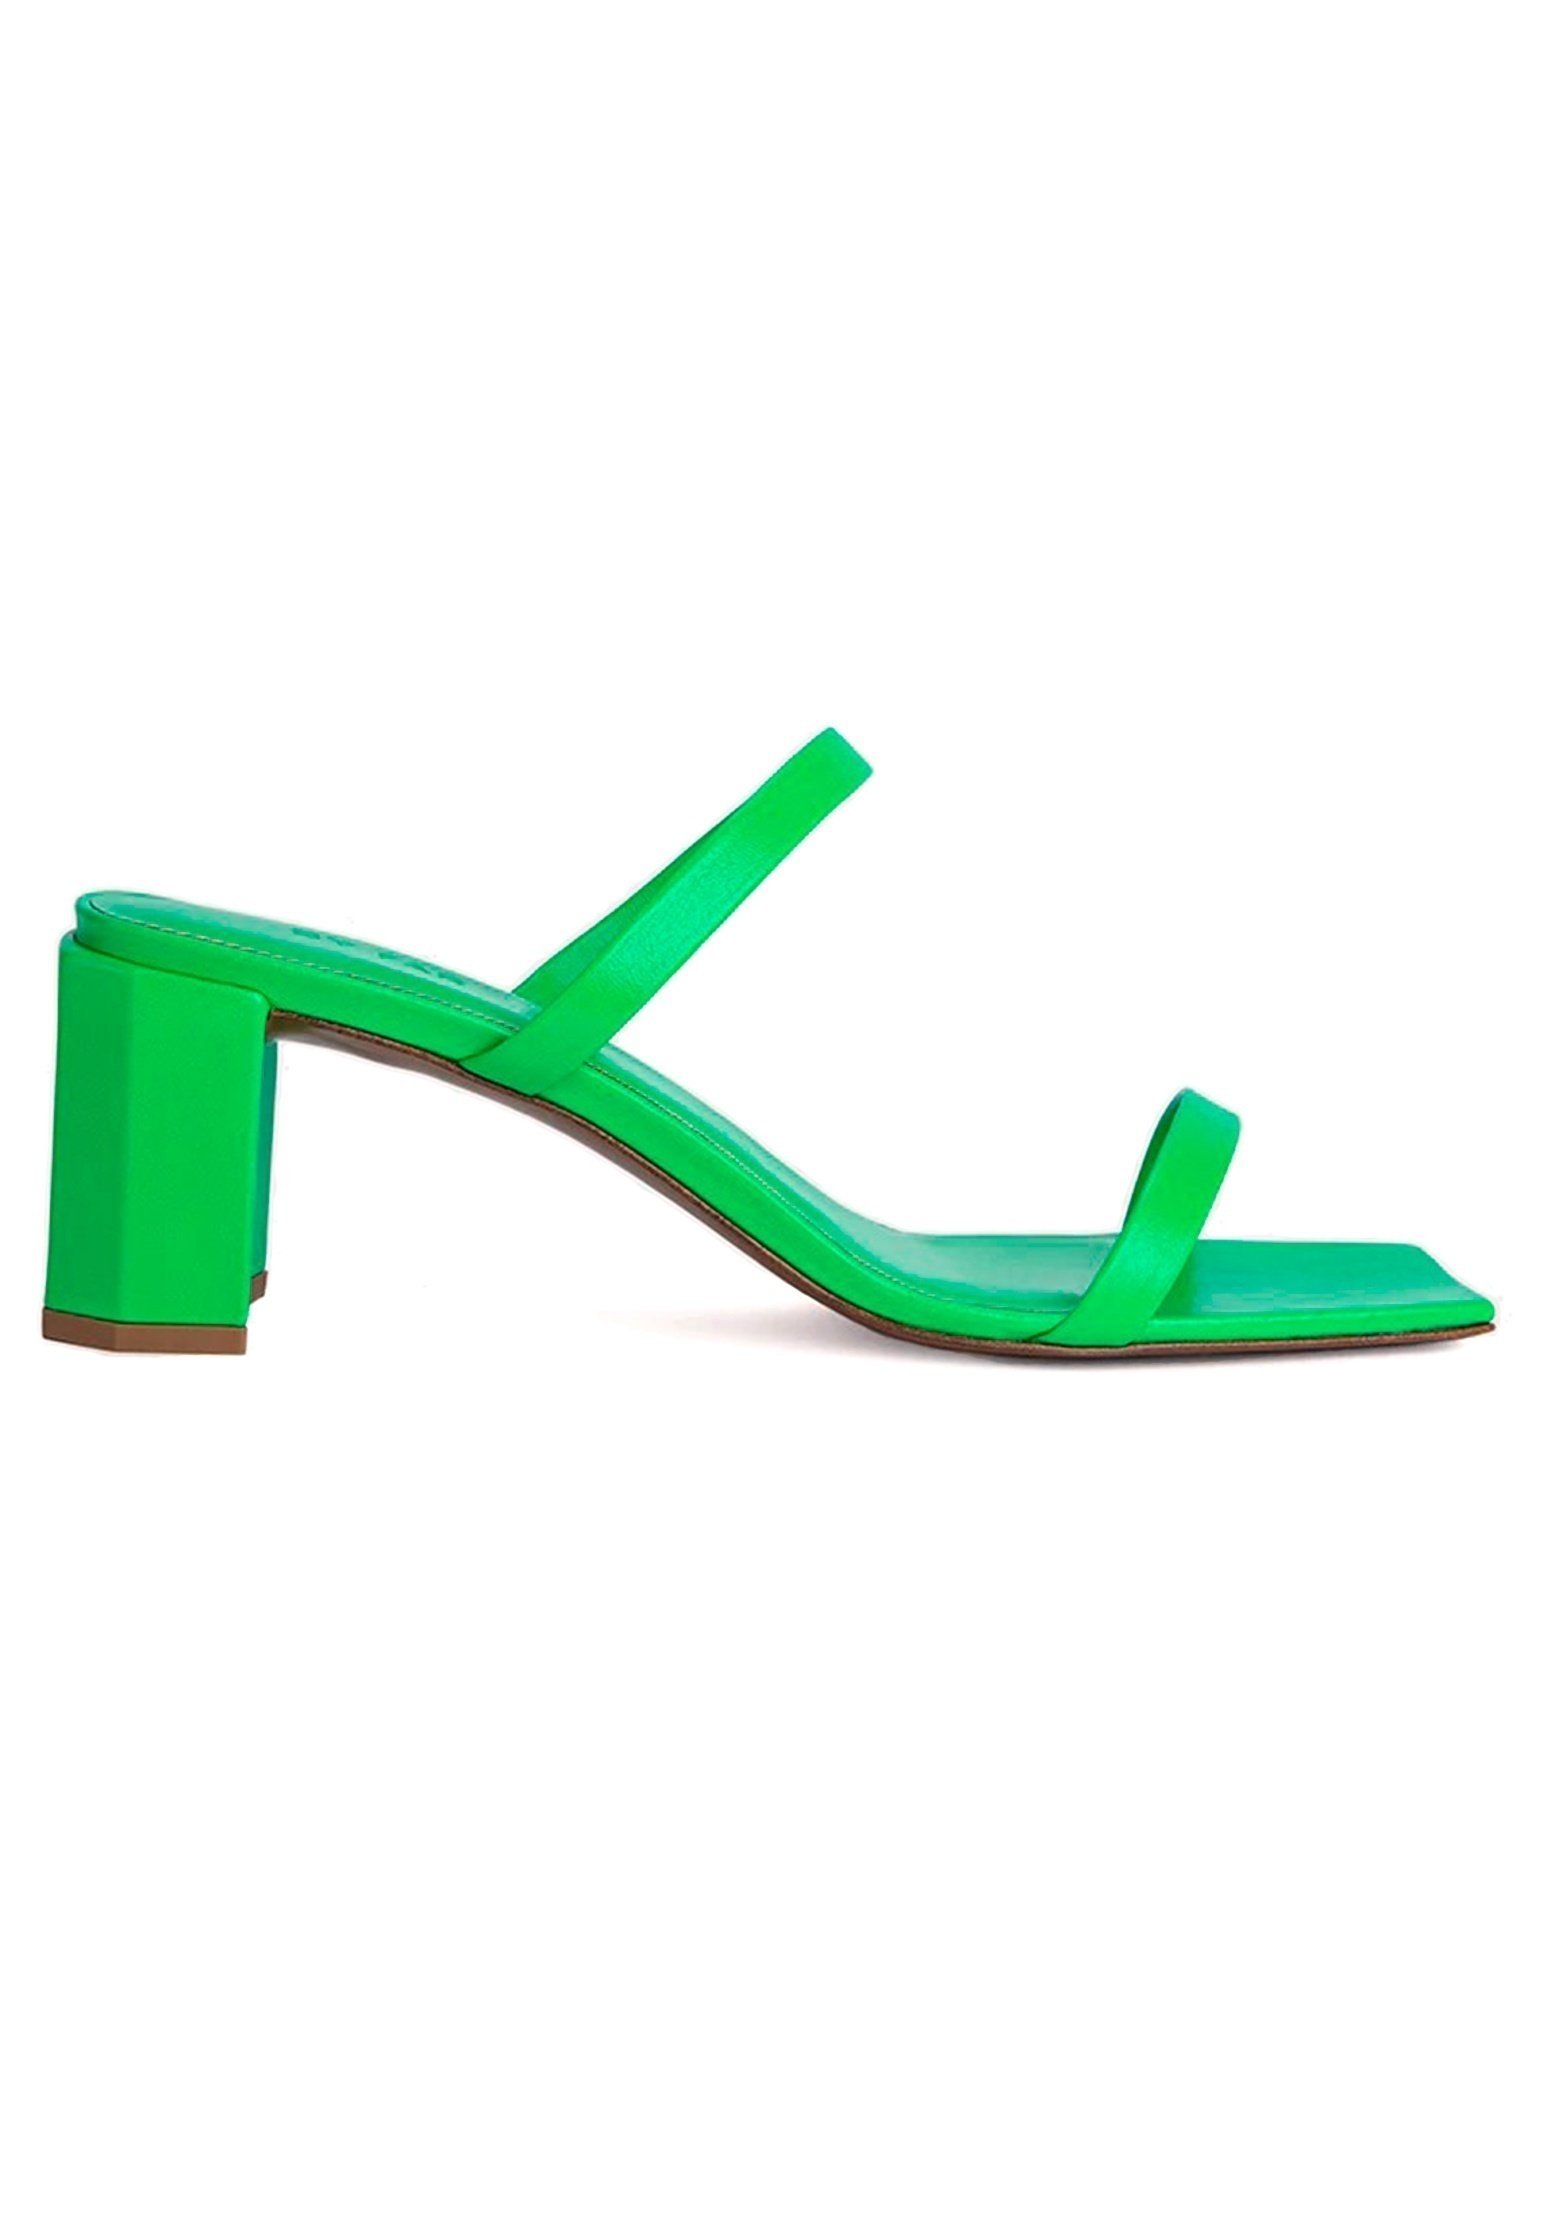 Mules BY FAR Color: green (Code: 585) in online store Allure